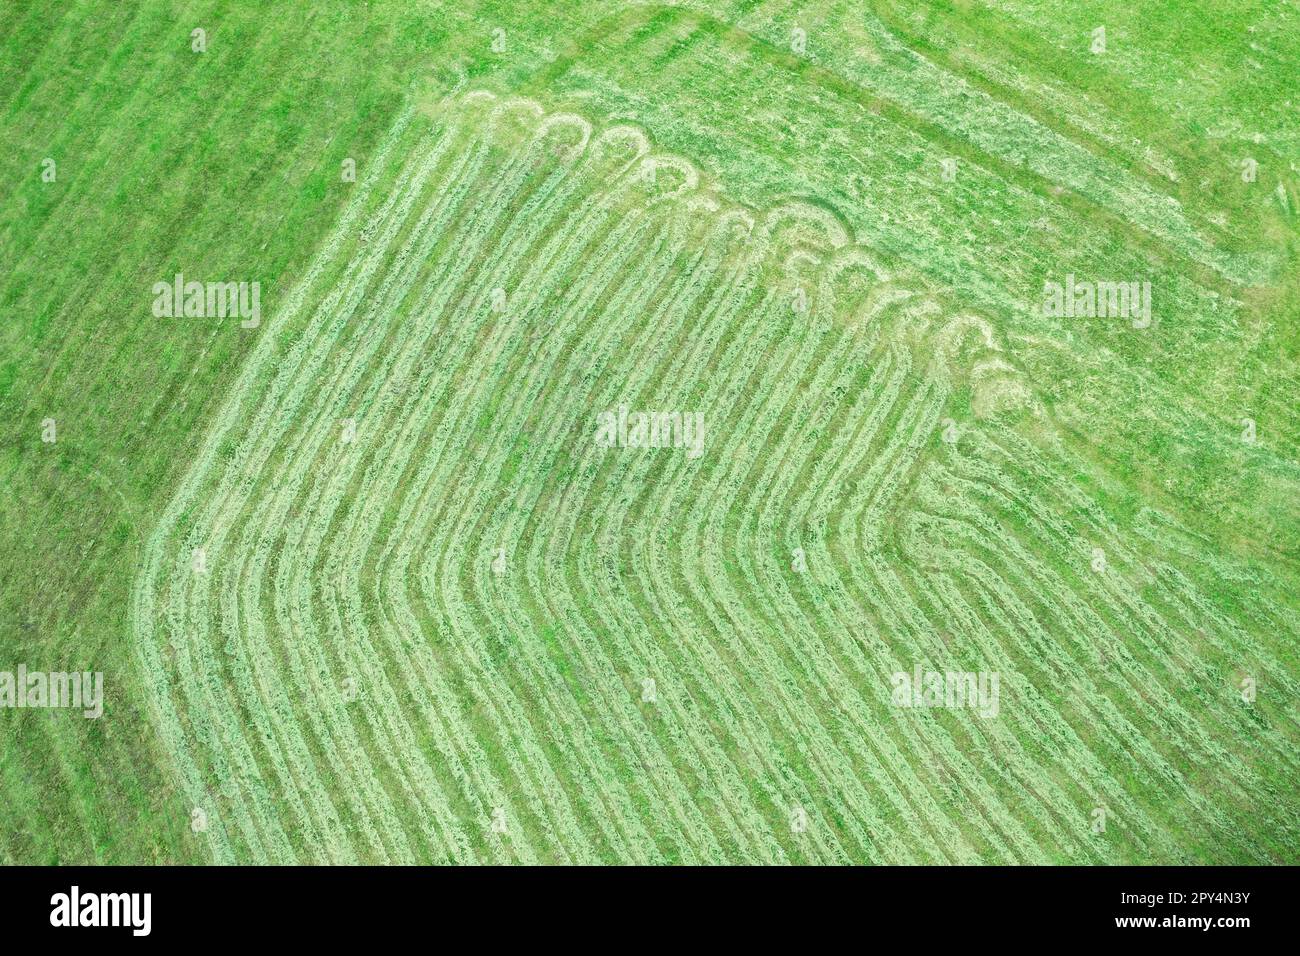 freshly cut green lawn with visible direction lines. natural grass background. aerial top view. Stock Photo